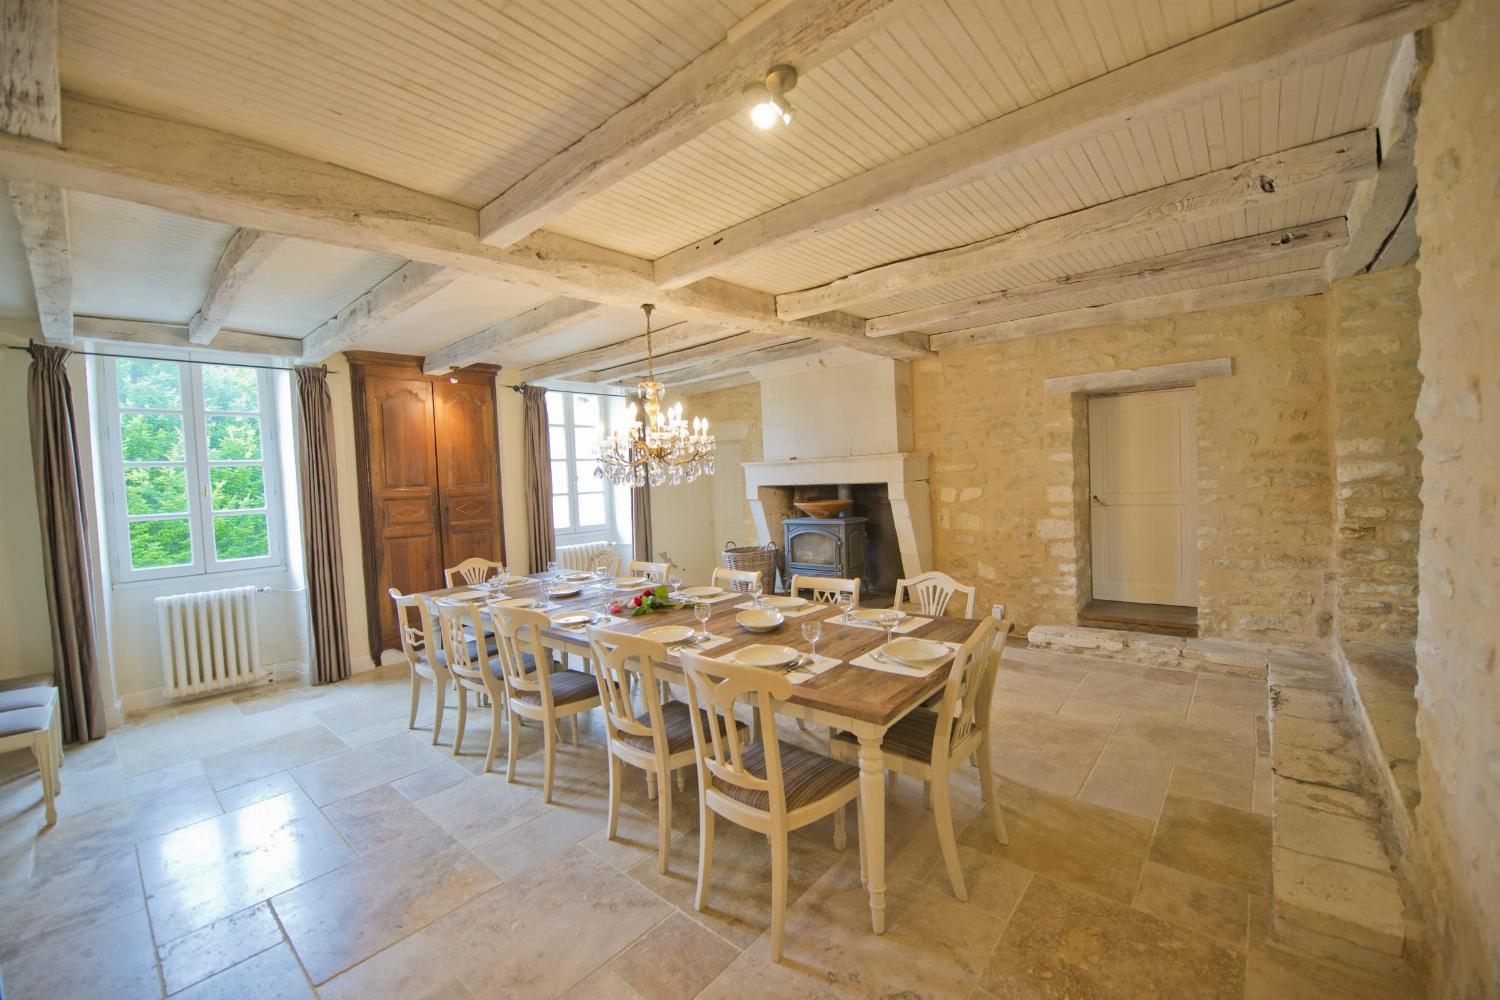 Dining room | Rental accommodation in Charente